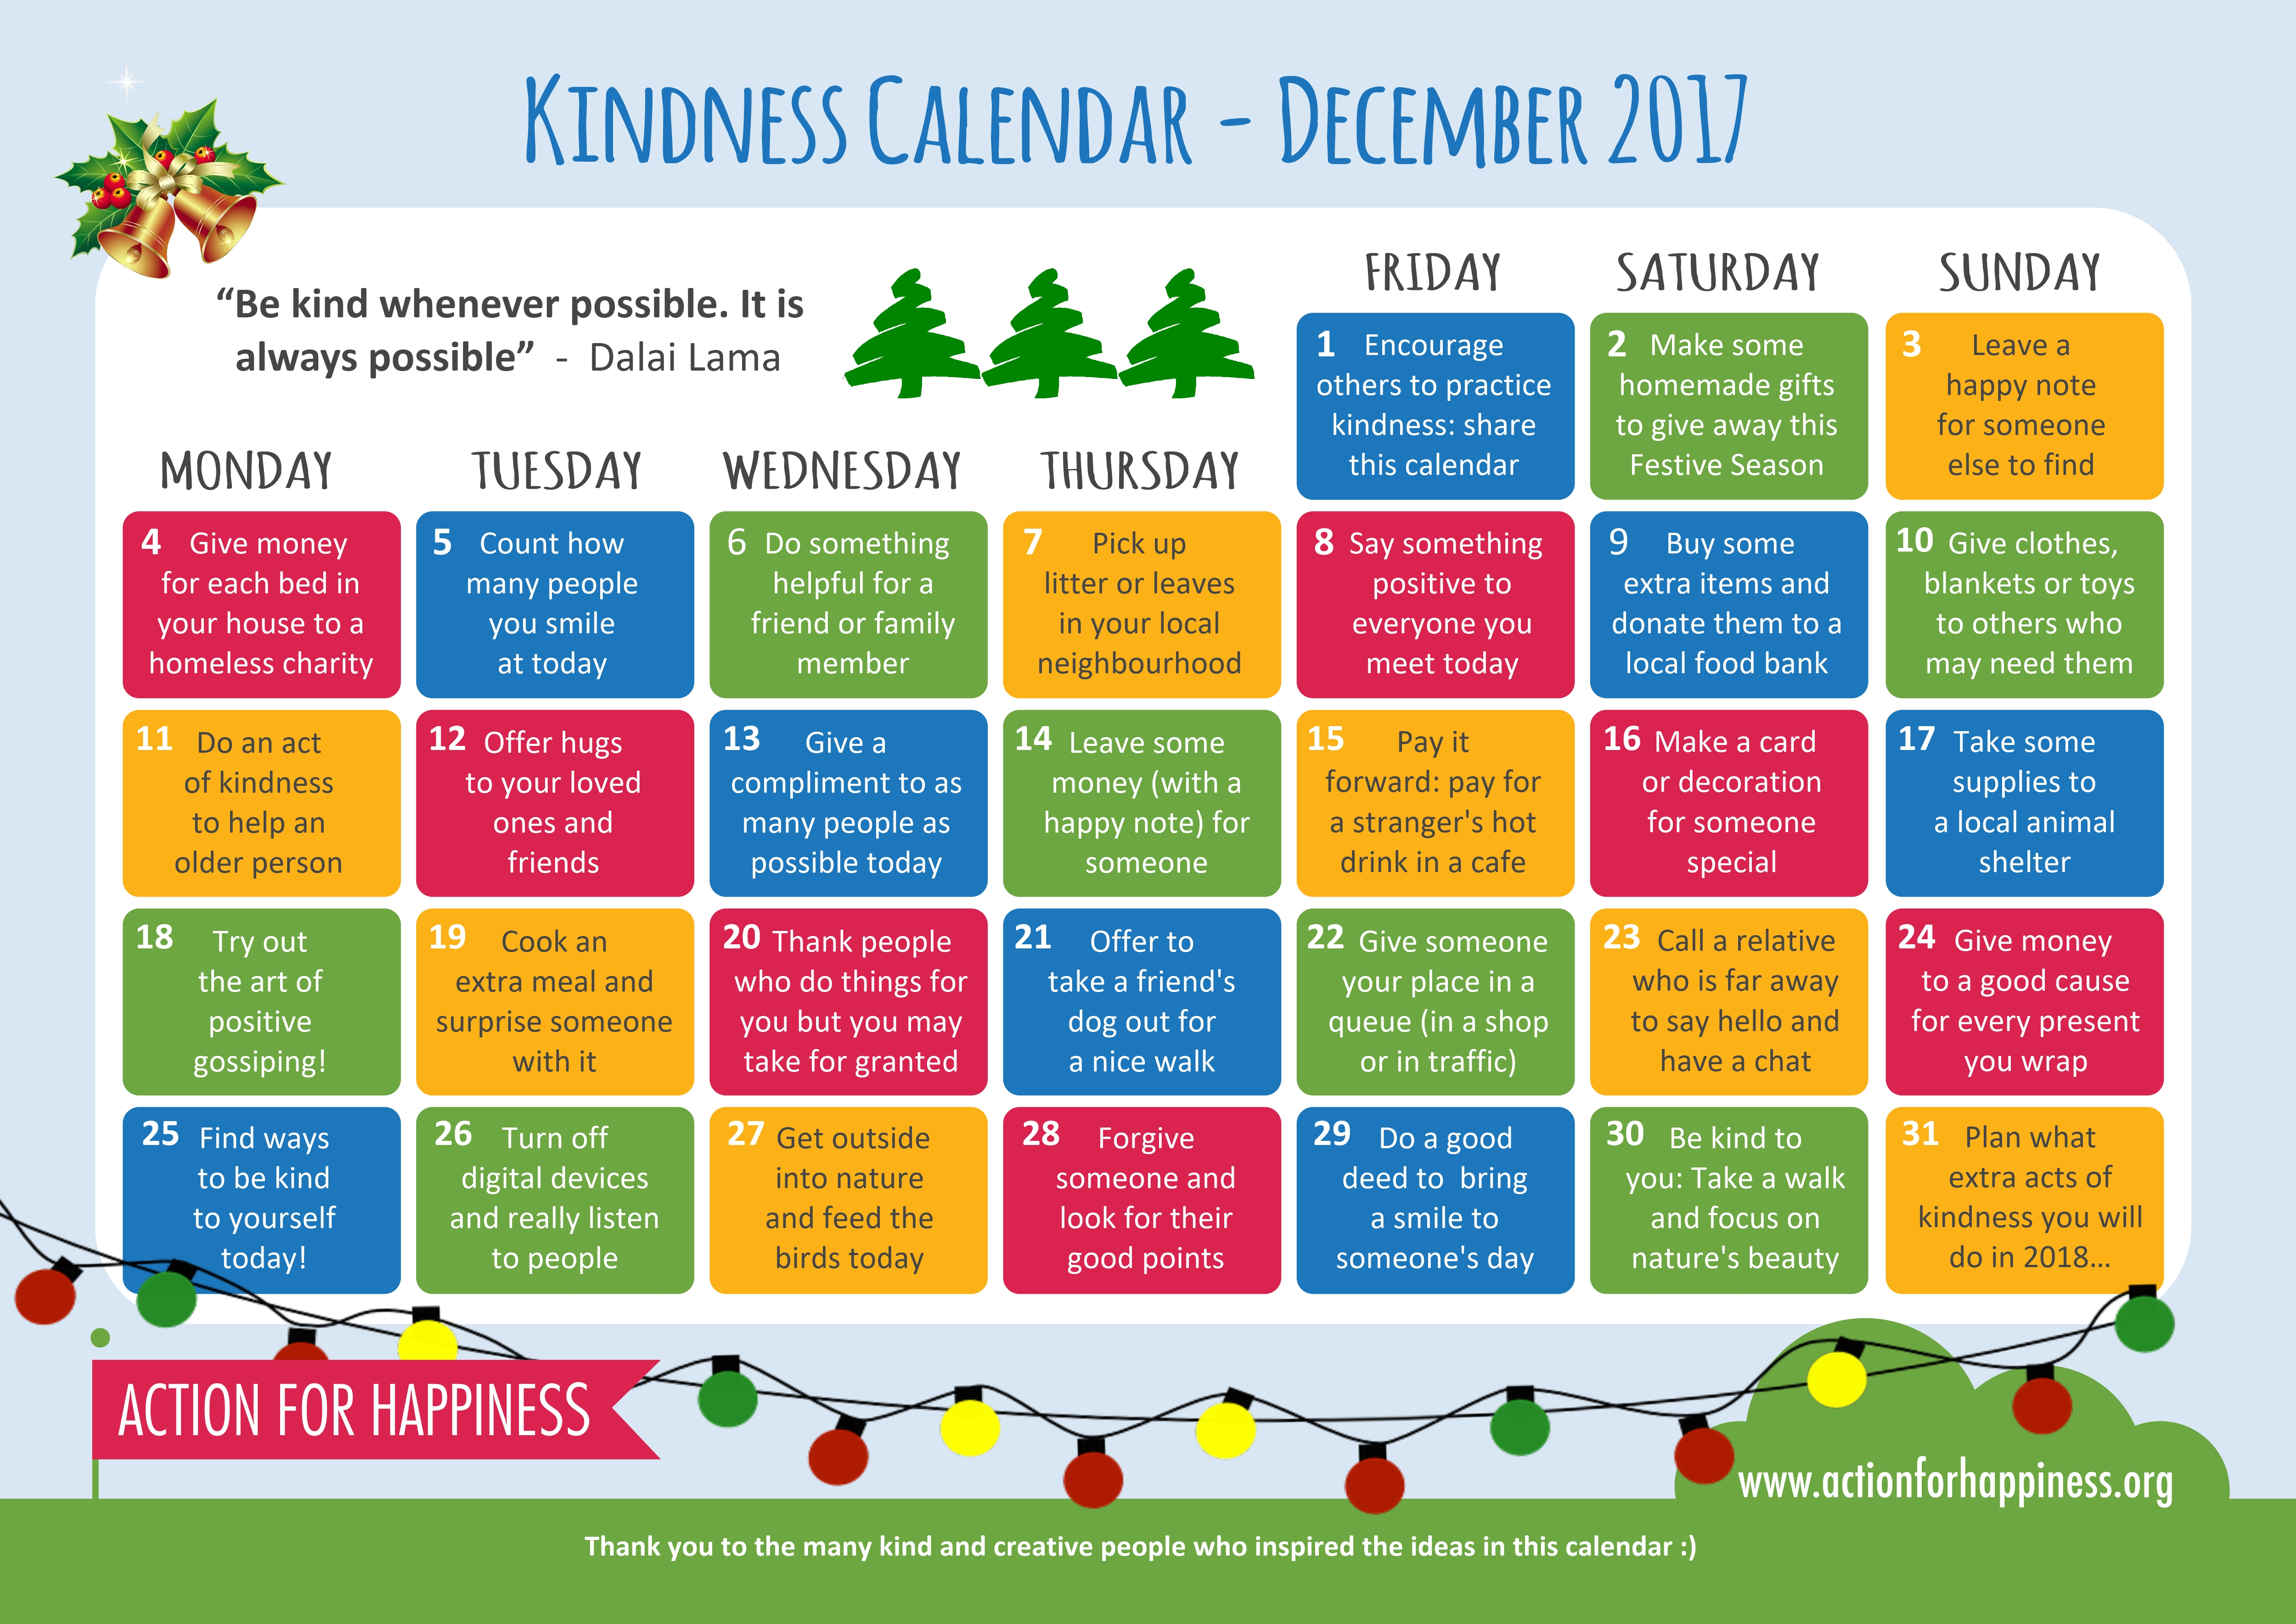 Kindness As A Destressor For The Holiday Season | Pediaplay with regard to Kindness Calendar Template